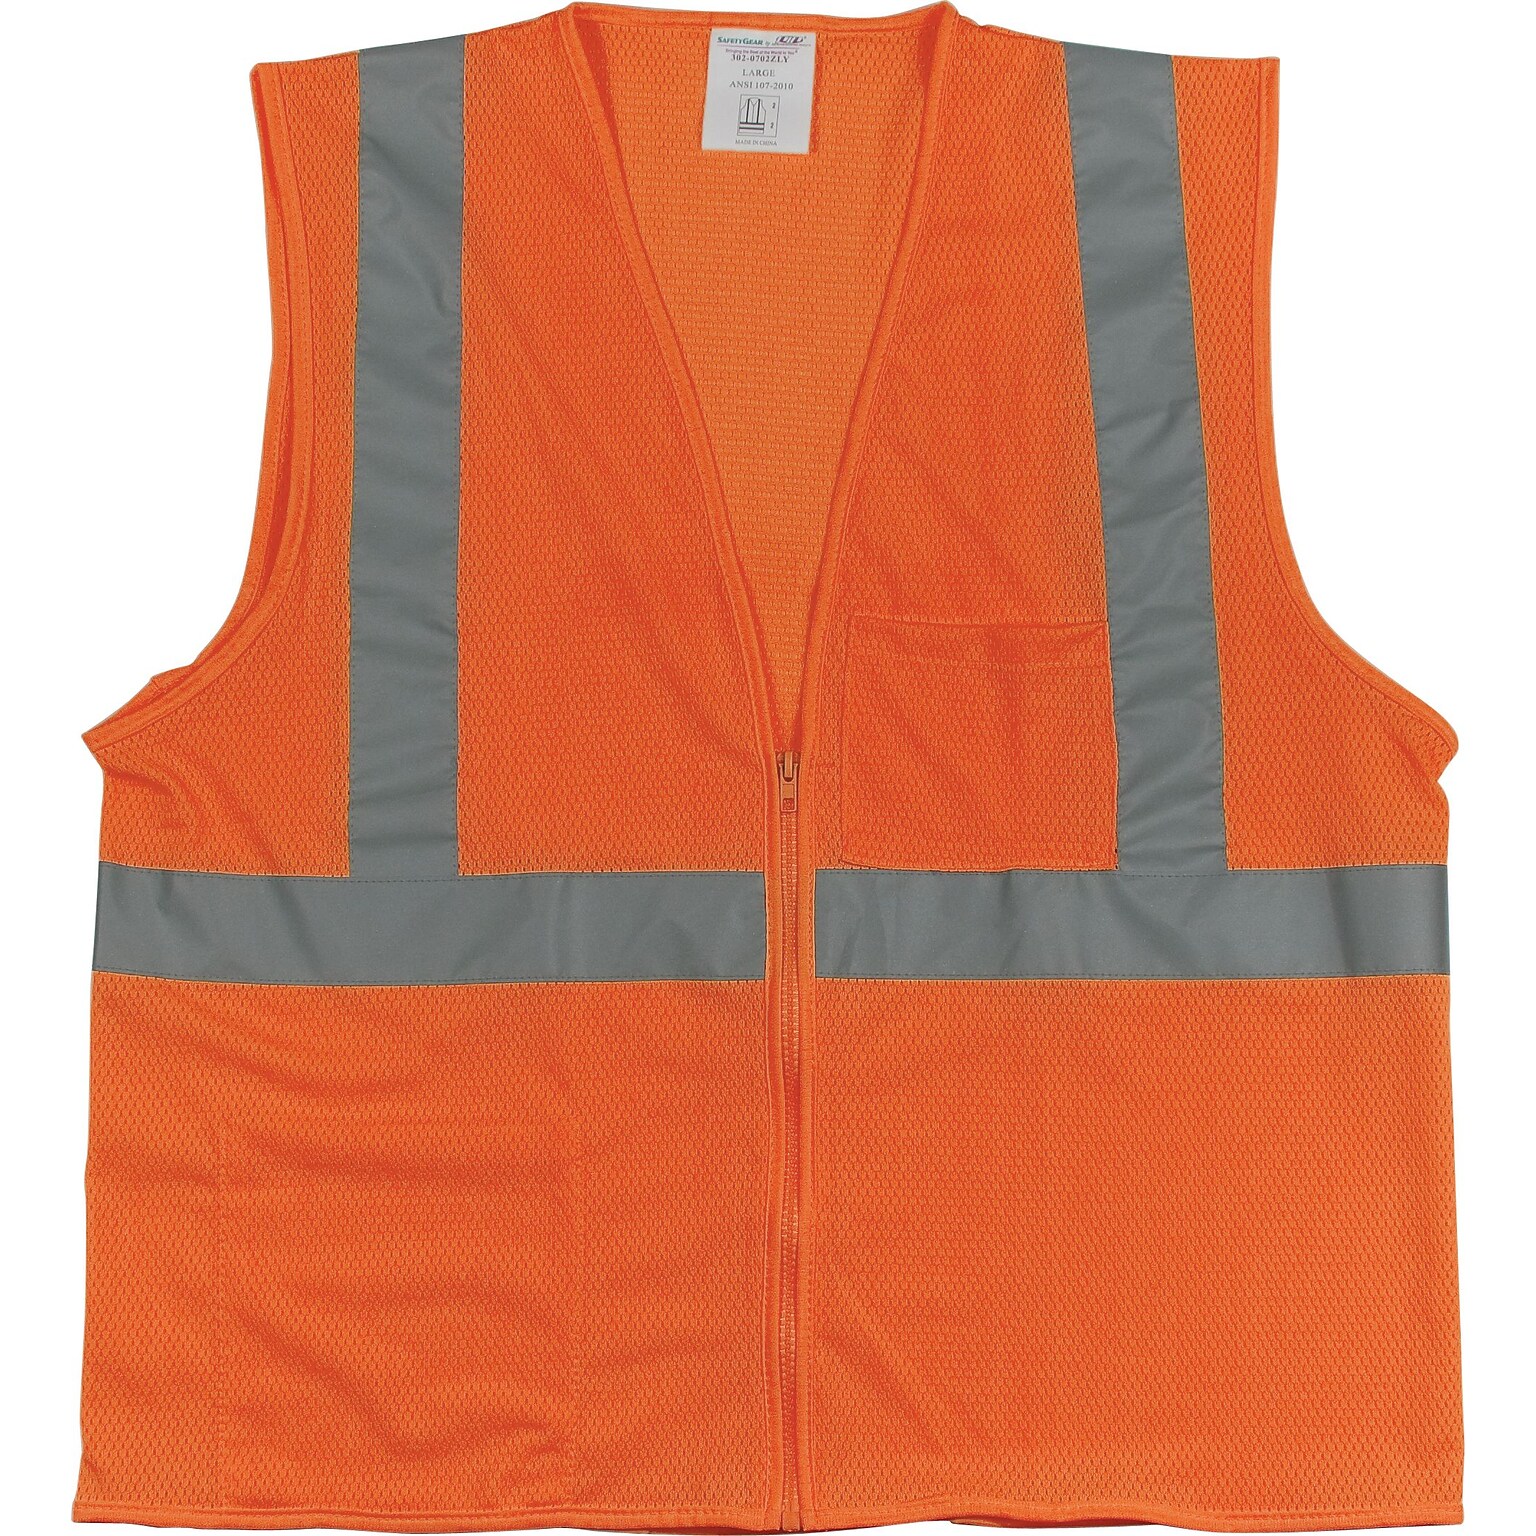 Protective Industrial Products High Visibility Sleeveless Safety Vest, ANSI Class R2, Orange, Large (302-0702Z-OR/L)